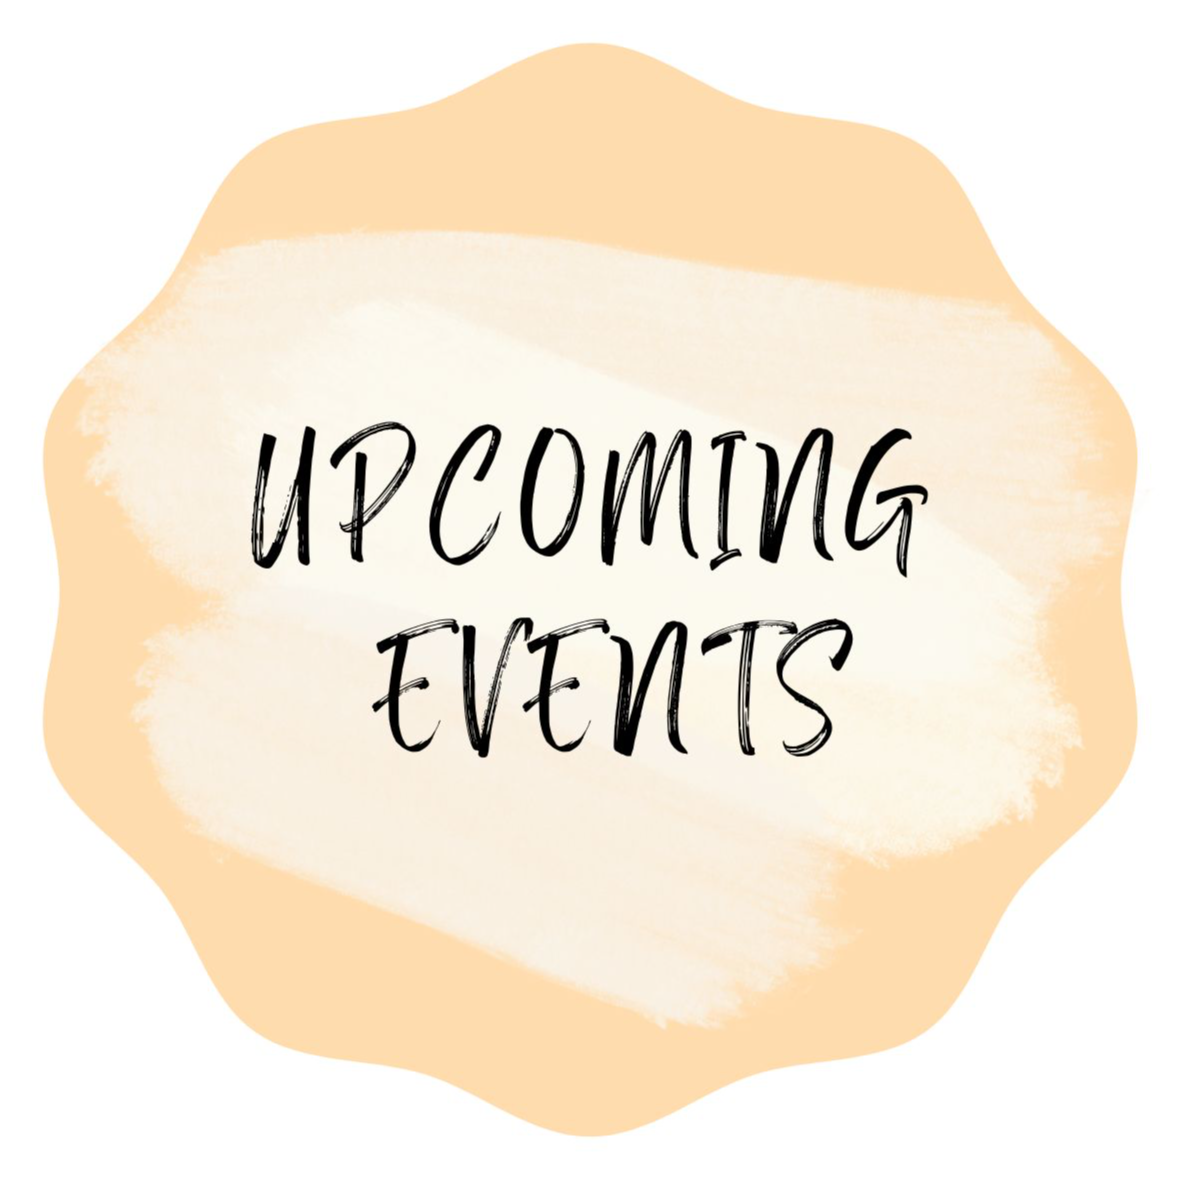 upcoming events